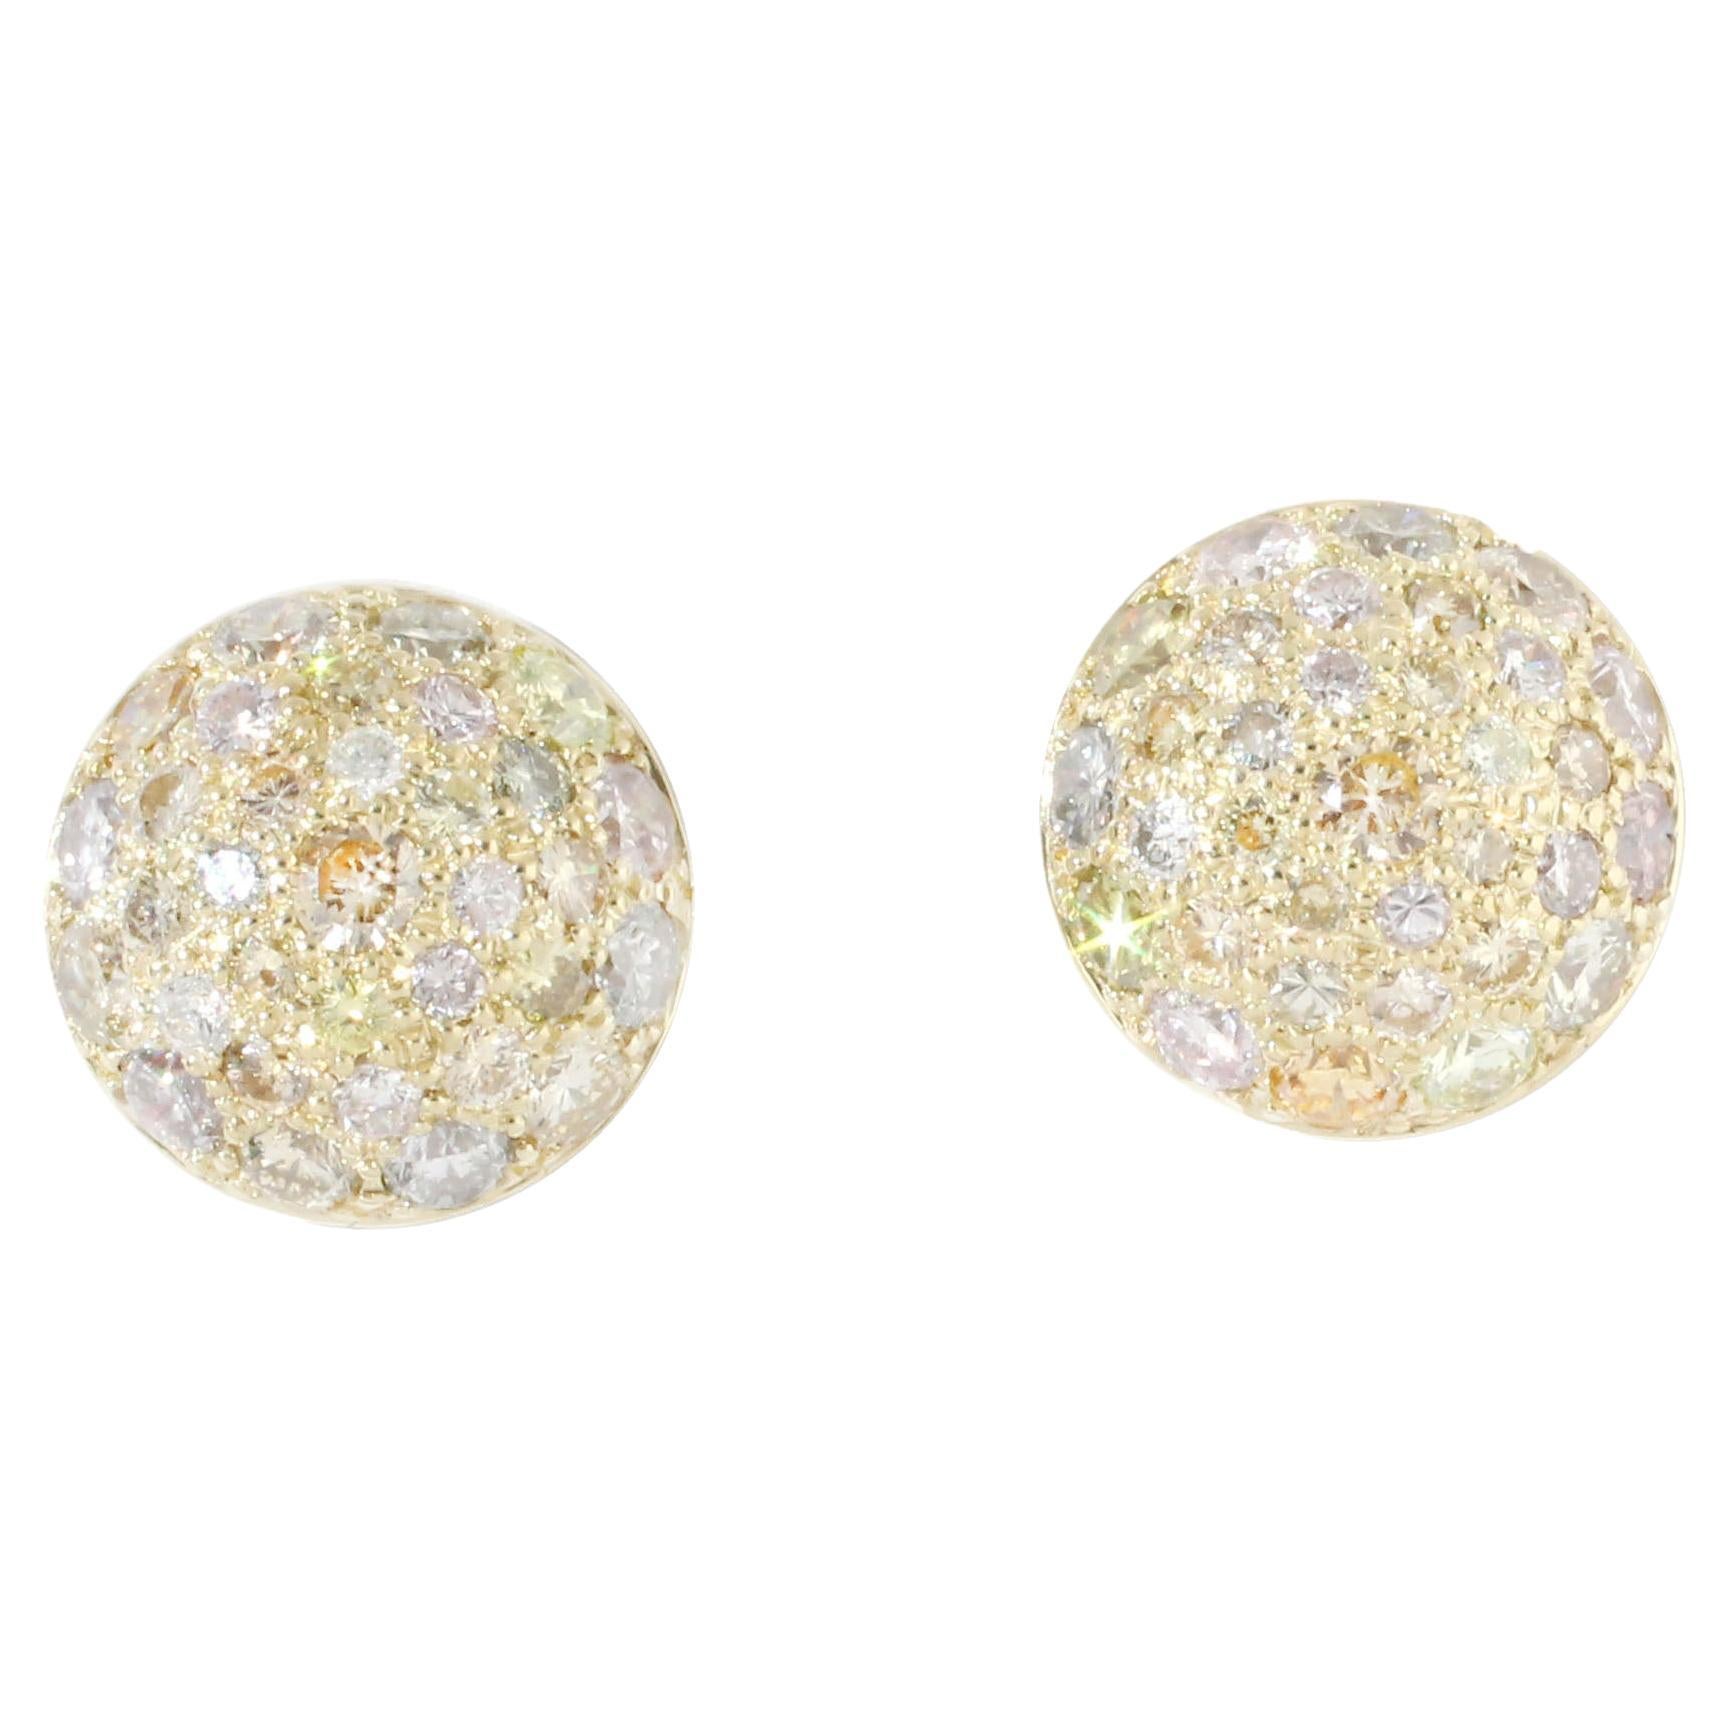 Julius Cohen Champagne Diamond Dome Earrings in 18 Kt Gold